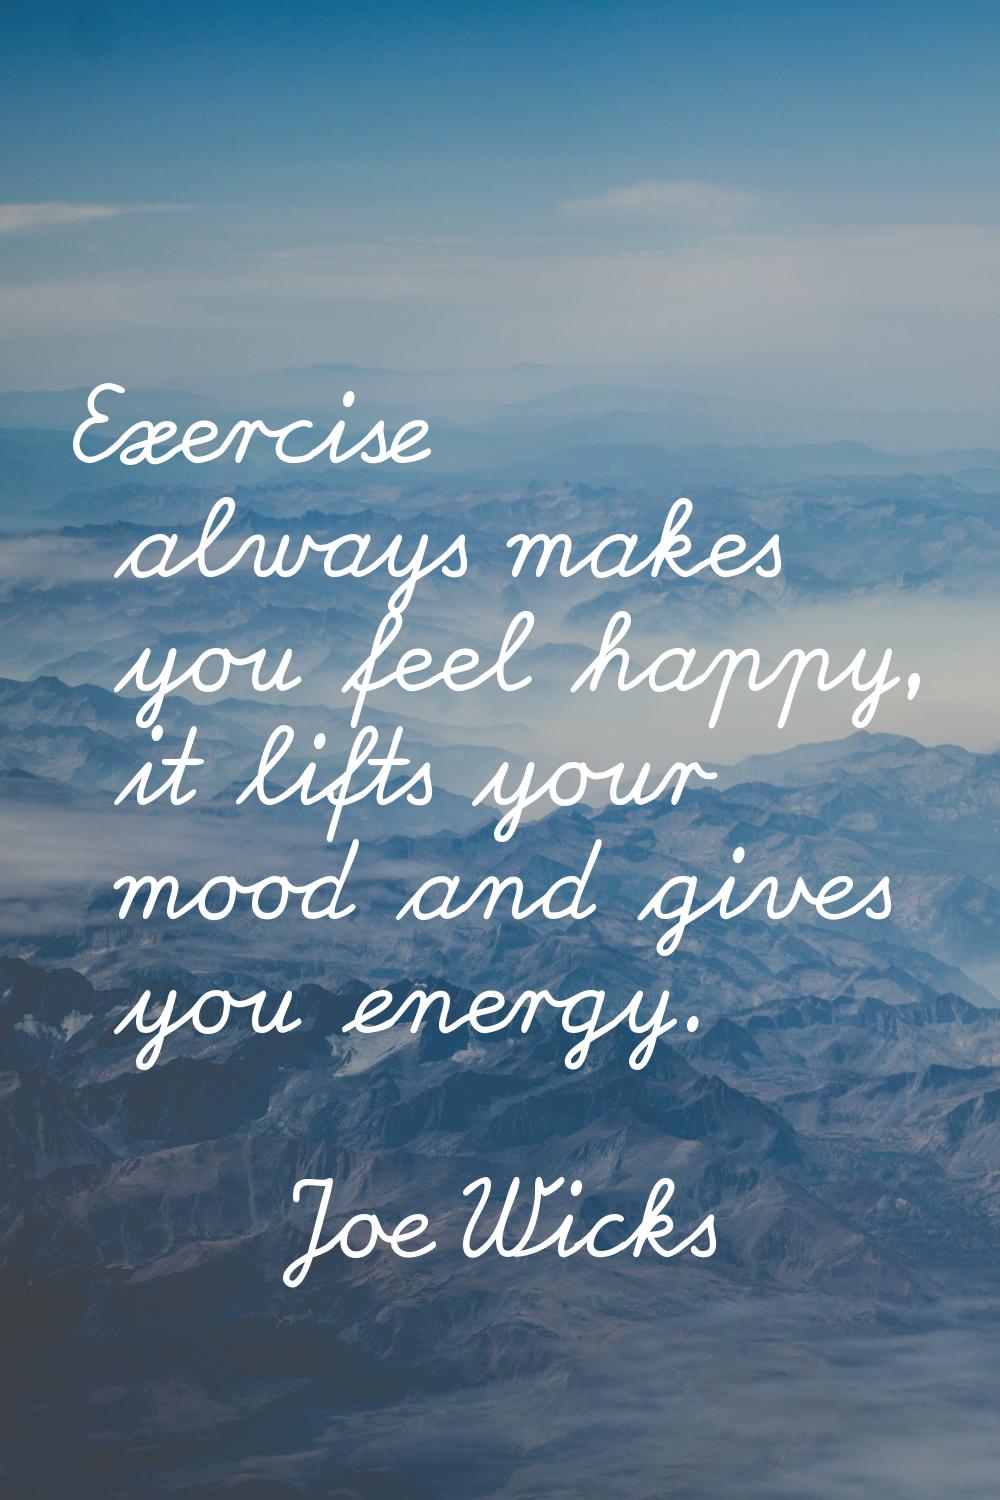 Exercise always makes you feel happy, it lifts your mood and gives you energy.